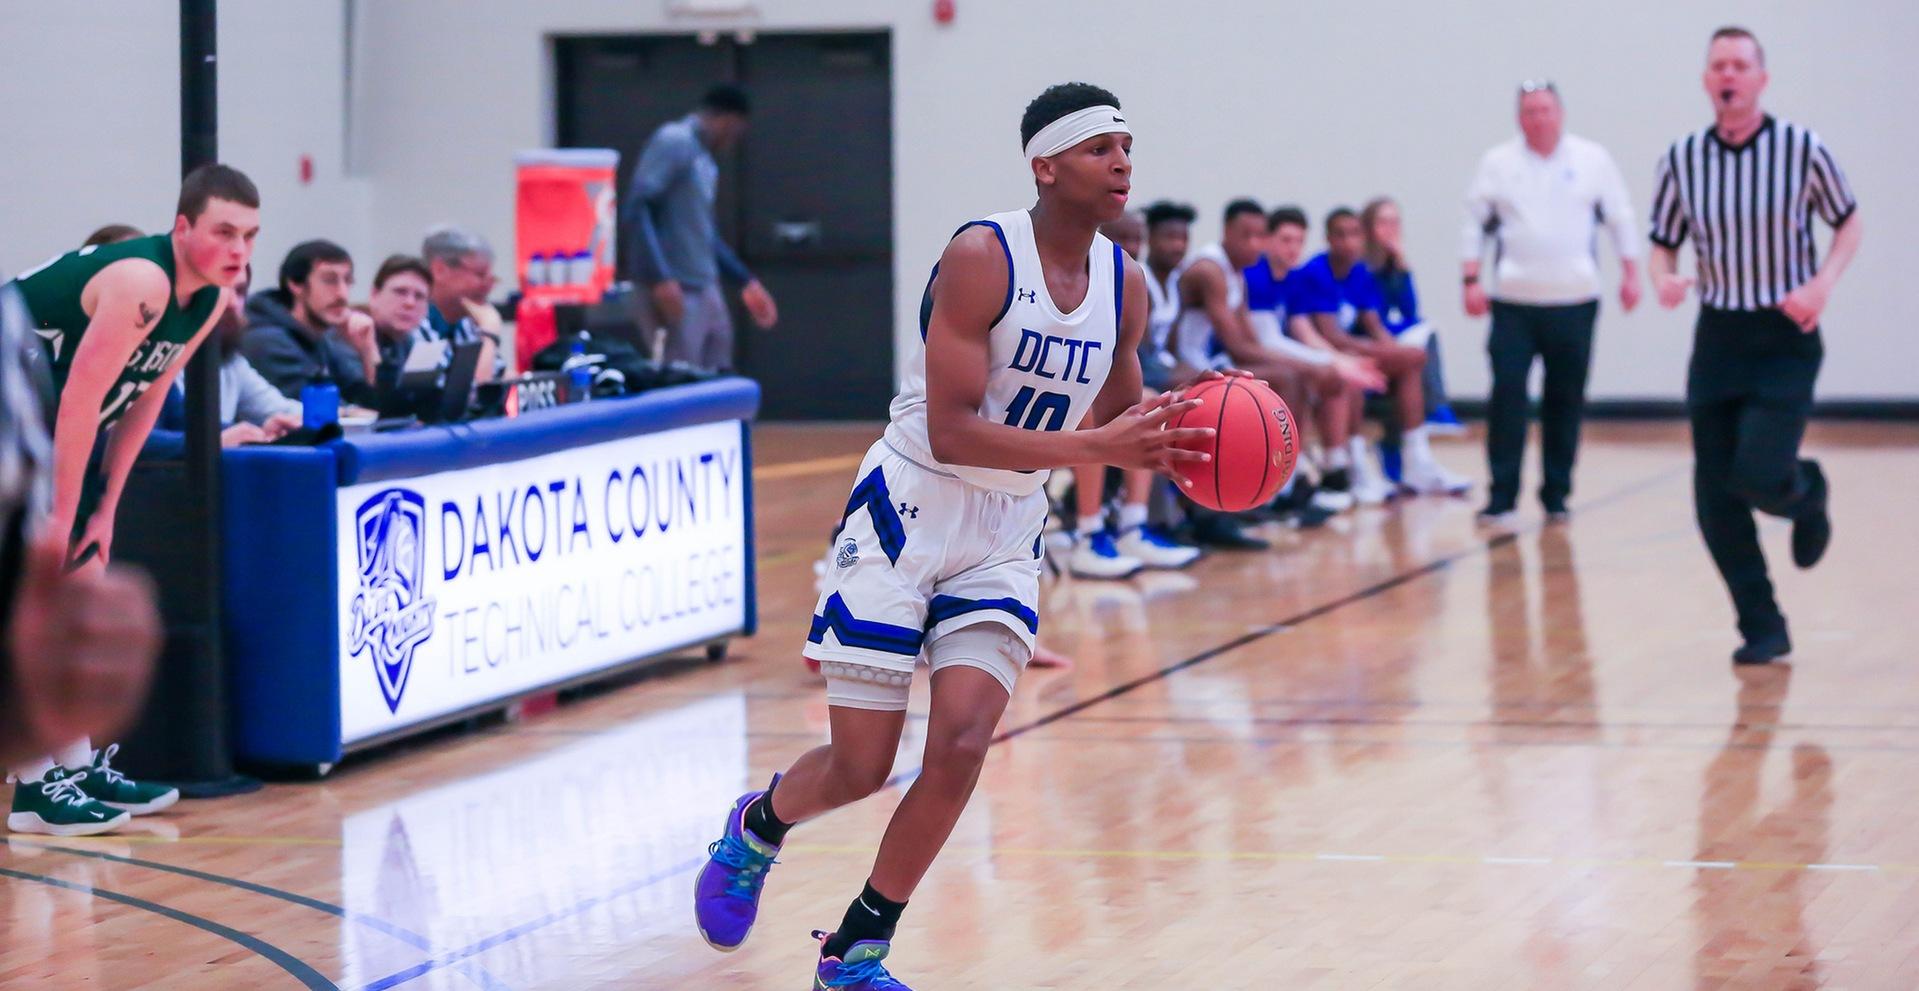 DCTC Drops Home Game